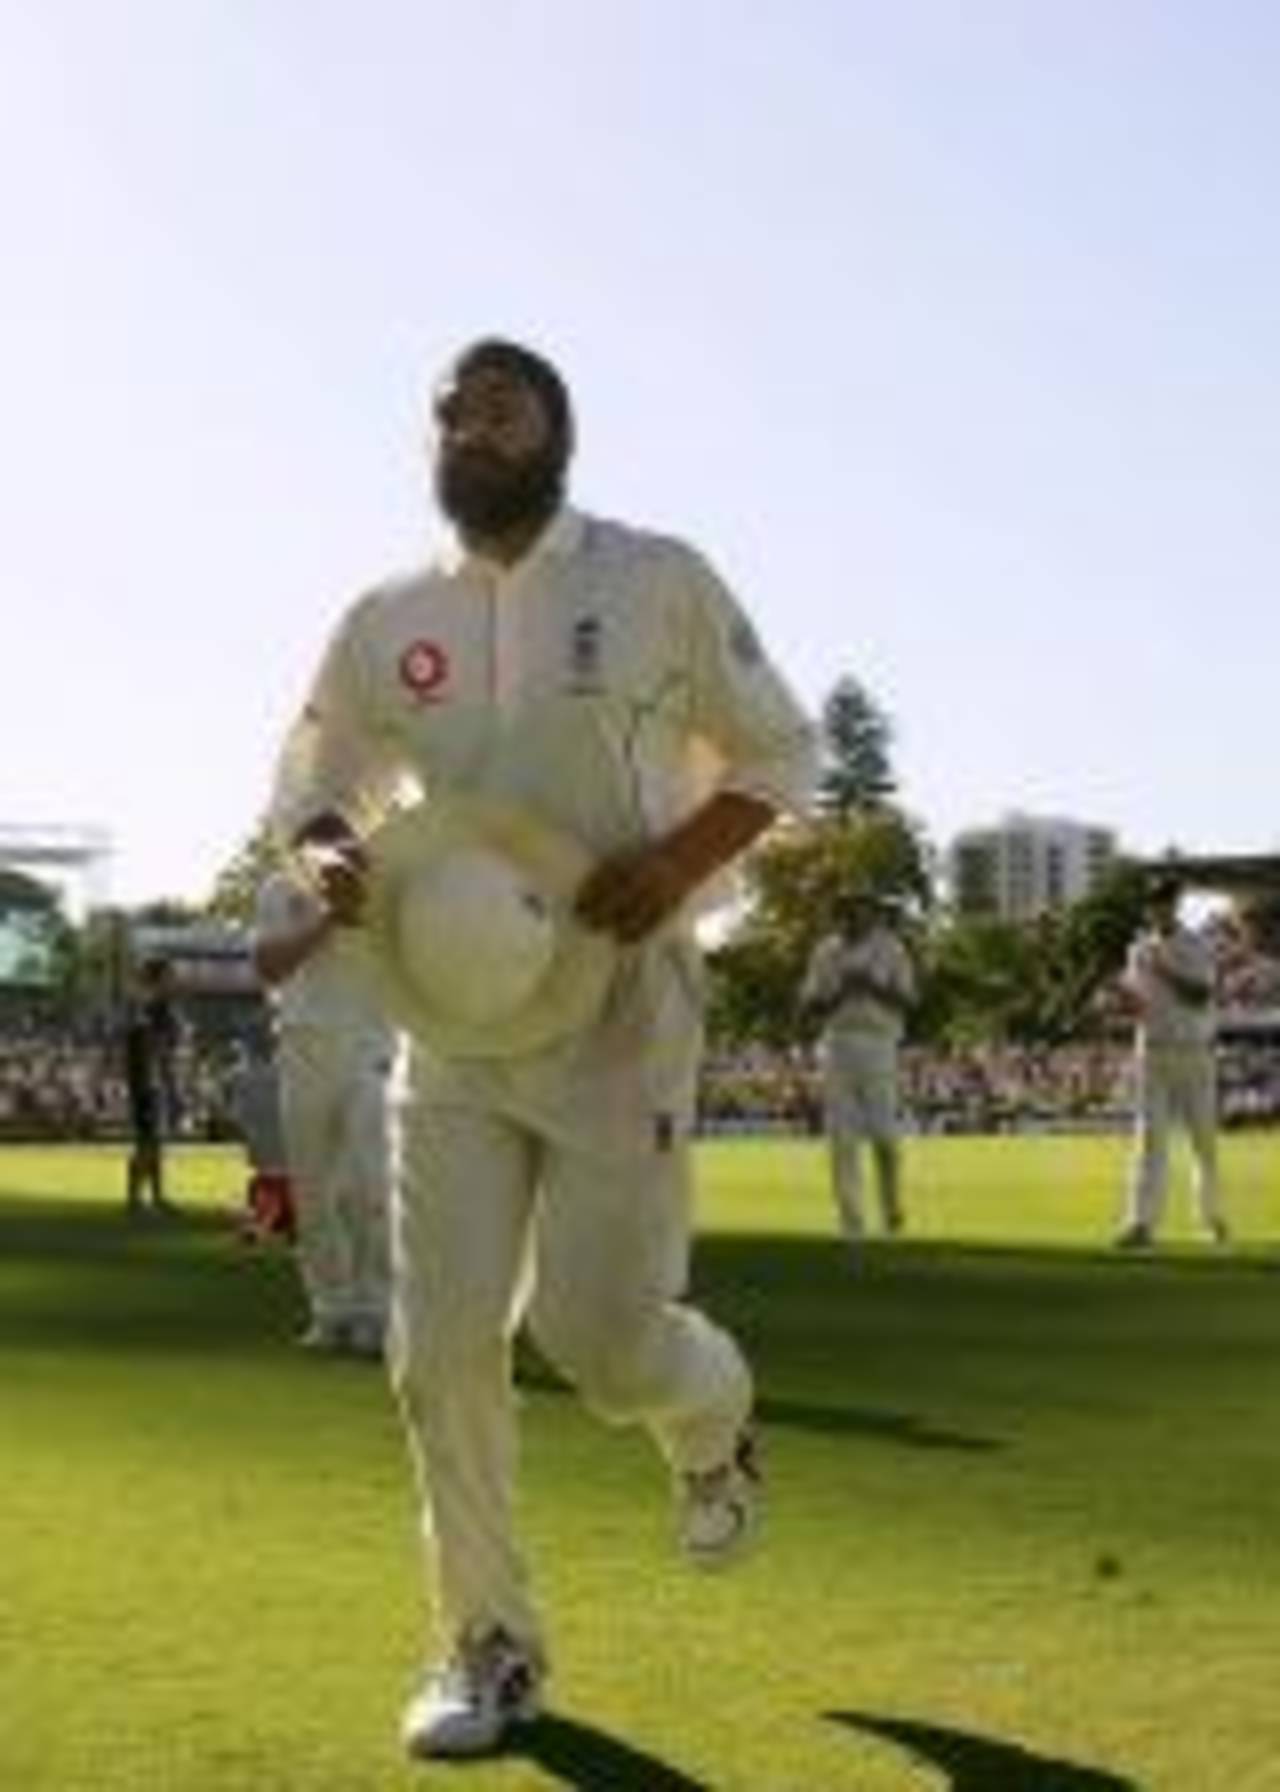 Monty Panesar leads his team-mates from the field after taking five wickets, Australia v England, 3rd Test, Perth, December 14, 2006